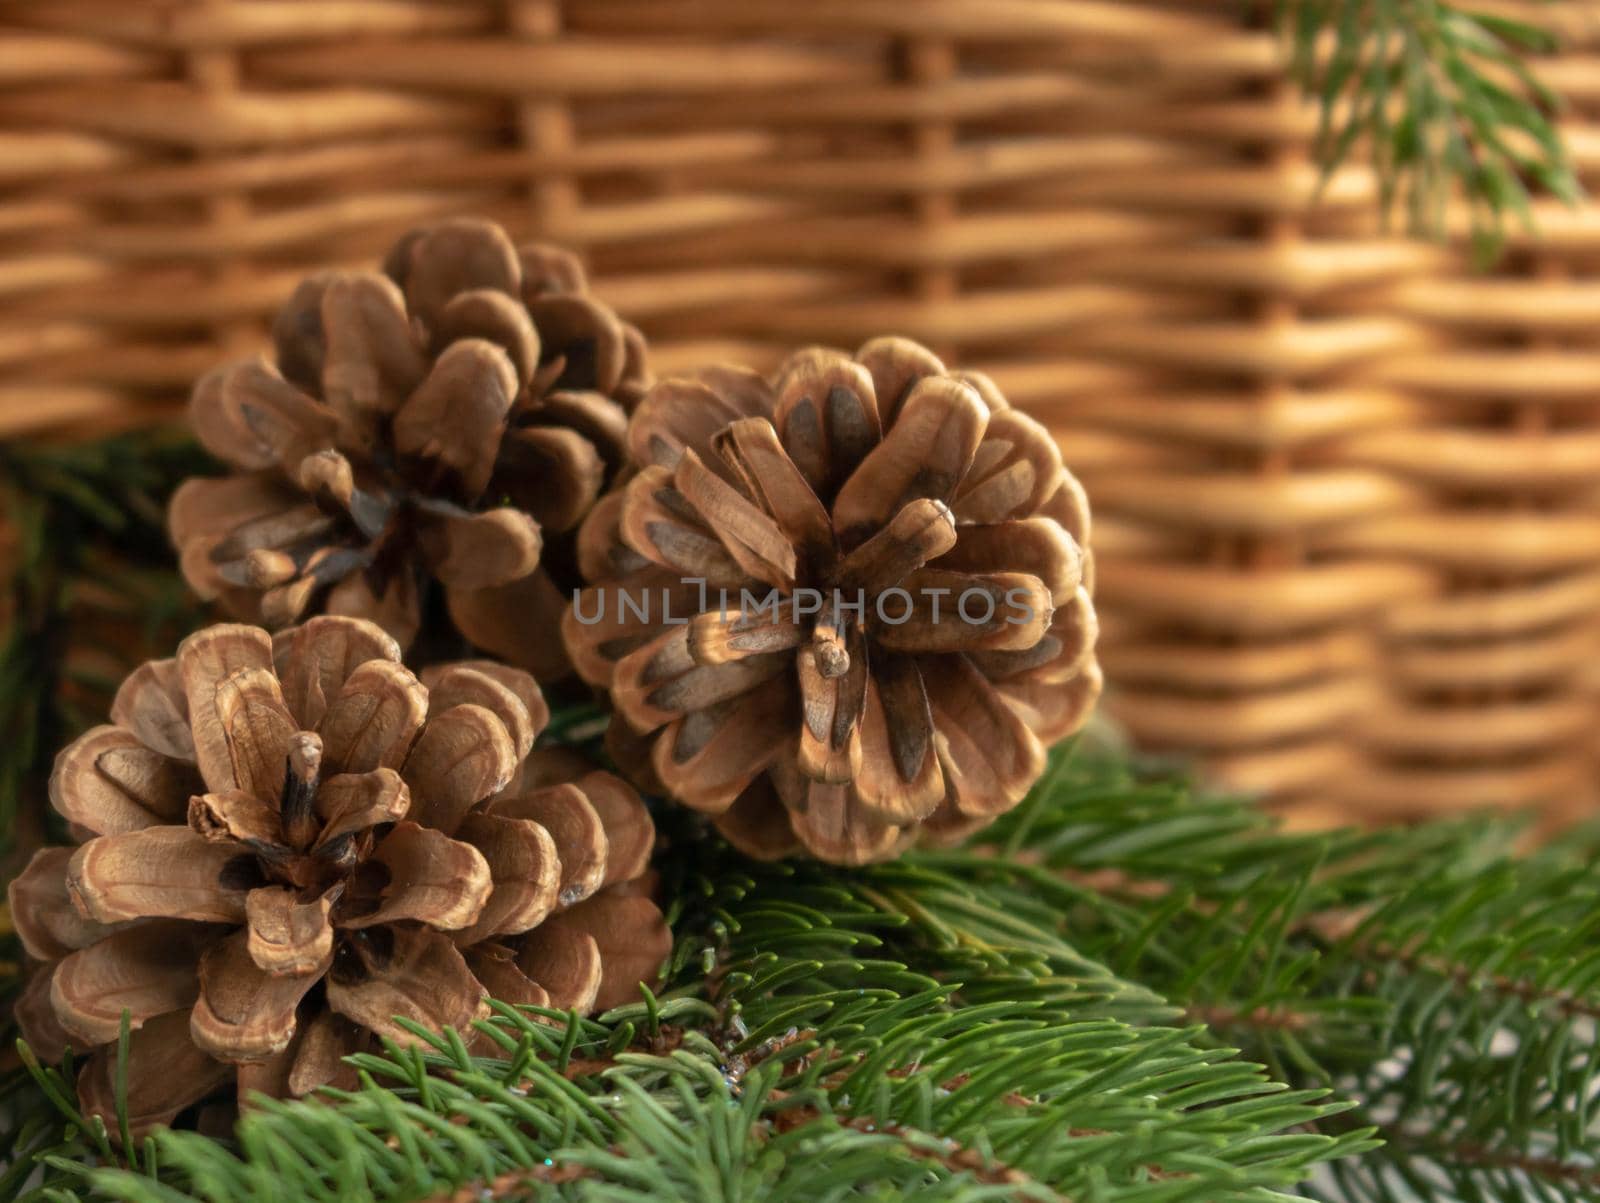 pine cones in a wicker basket on a brown background by lapushka62